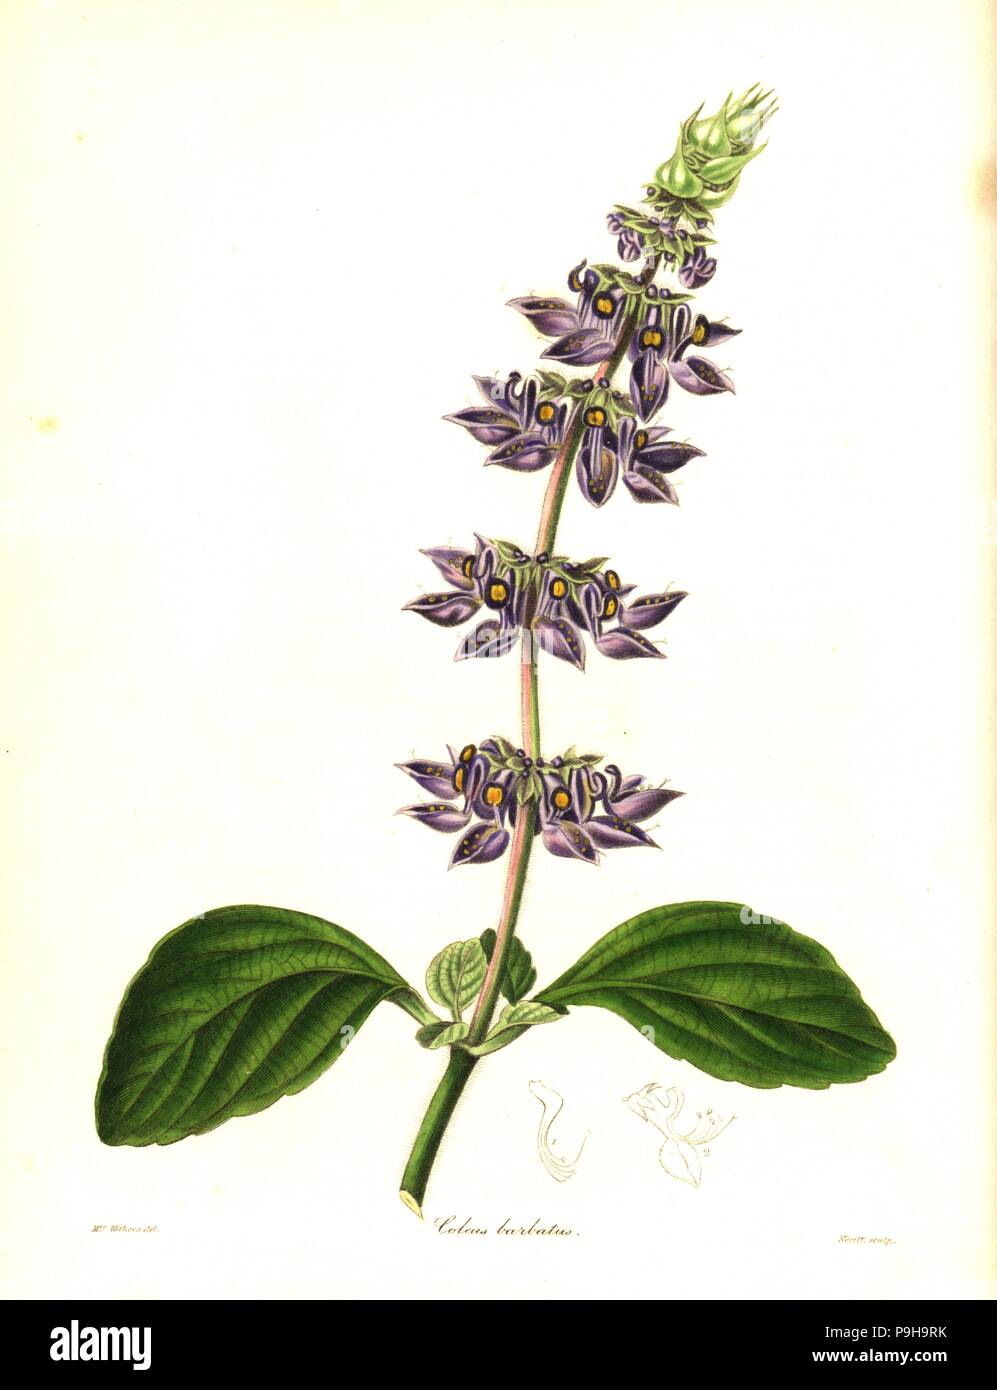 Indian coleus, Plectranthus barbatus (Bearded coleus, Coleus barbatus). Handcoloured copperplate engraving by S. Nevitt after a botanical illustration by Mrs Augusta Withers from Benjamin Maund and the Rev. John Stevens Henslow's The Botanist, London, 1836. Stock Photo